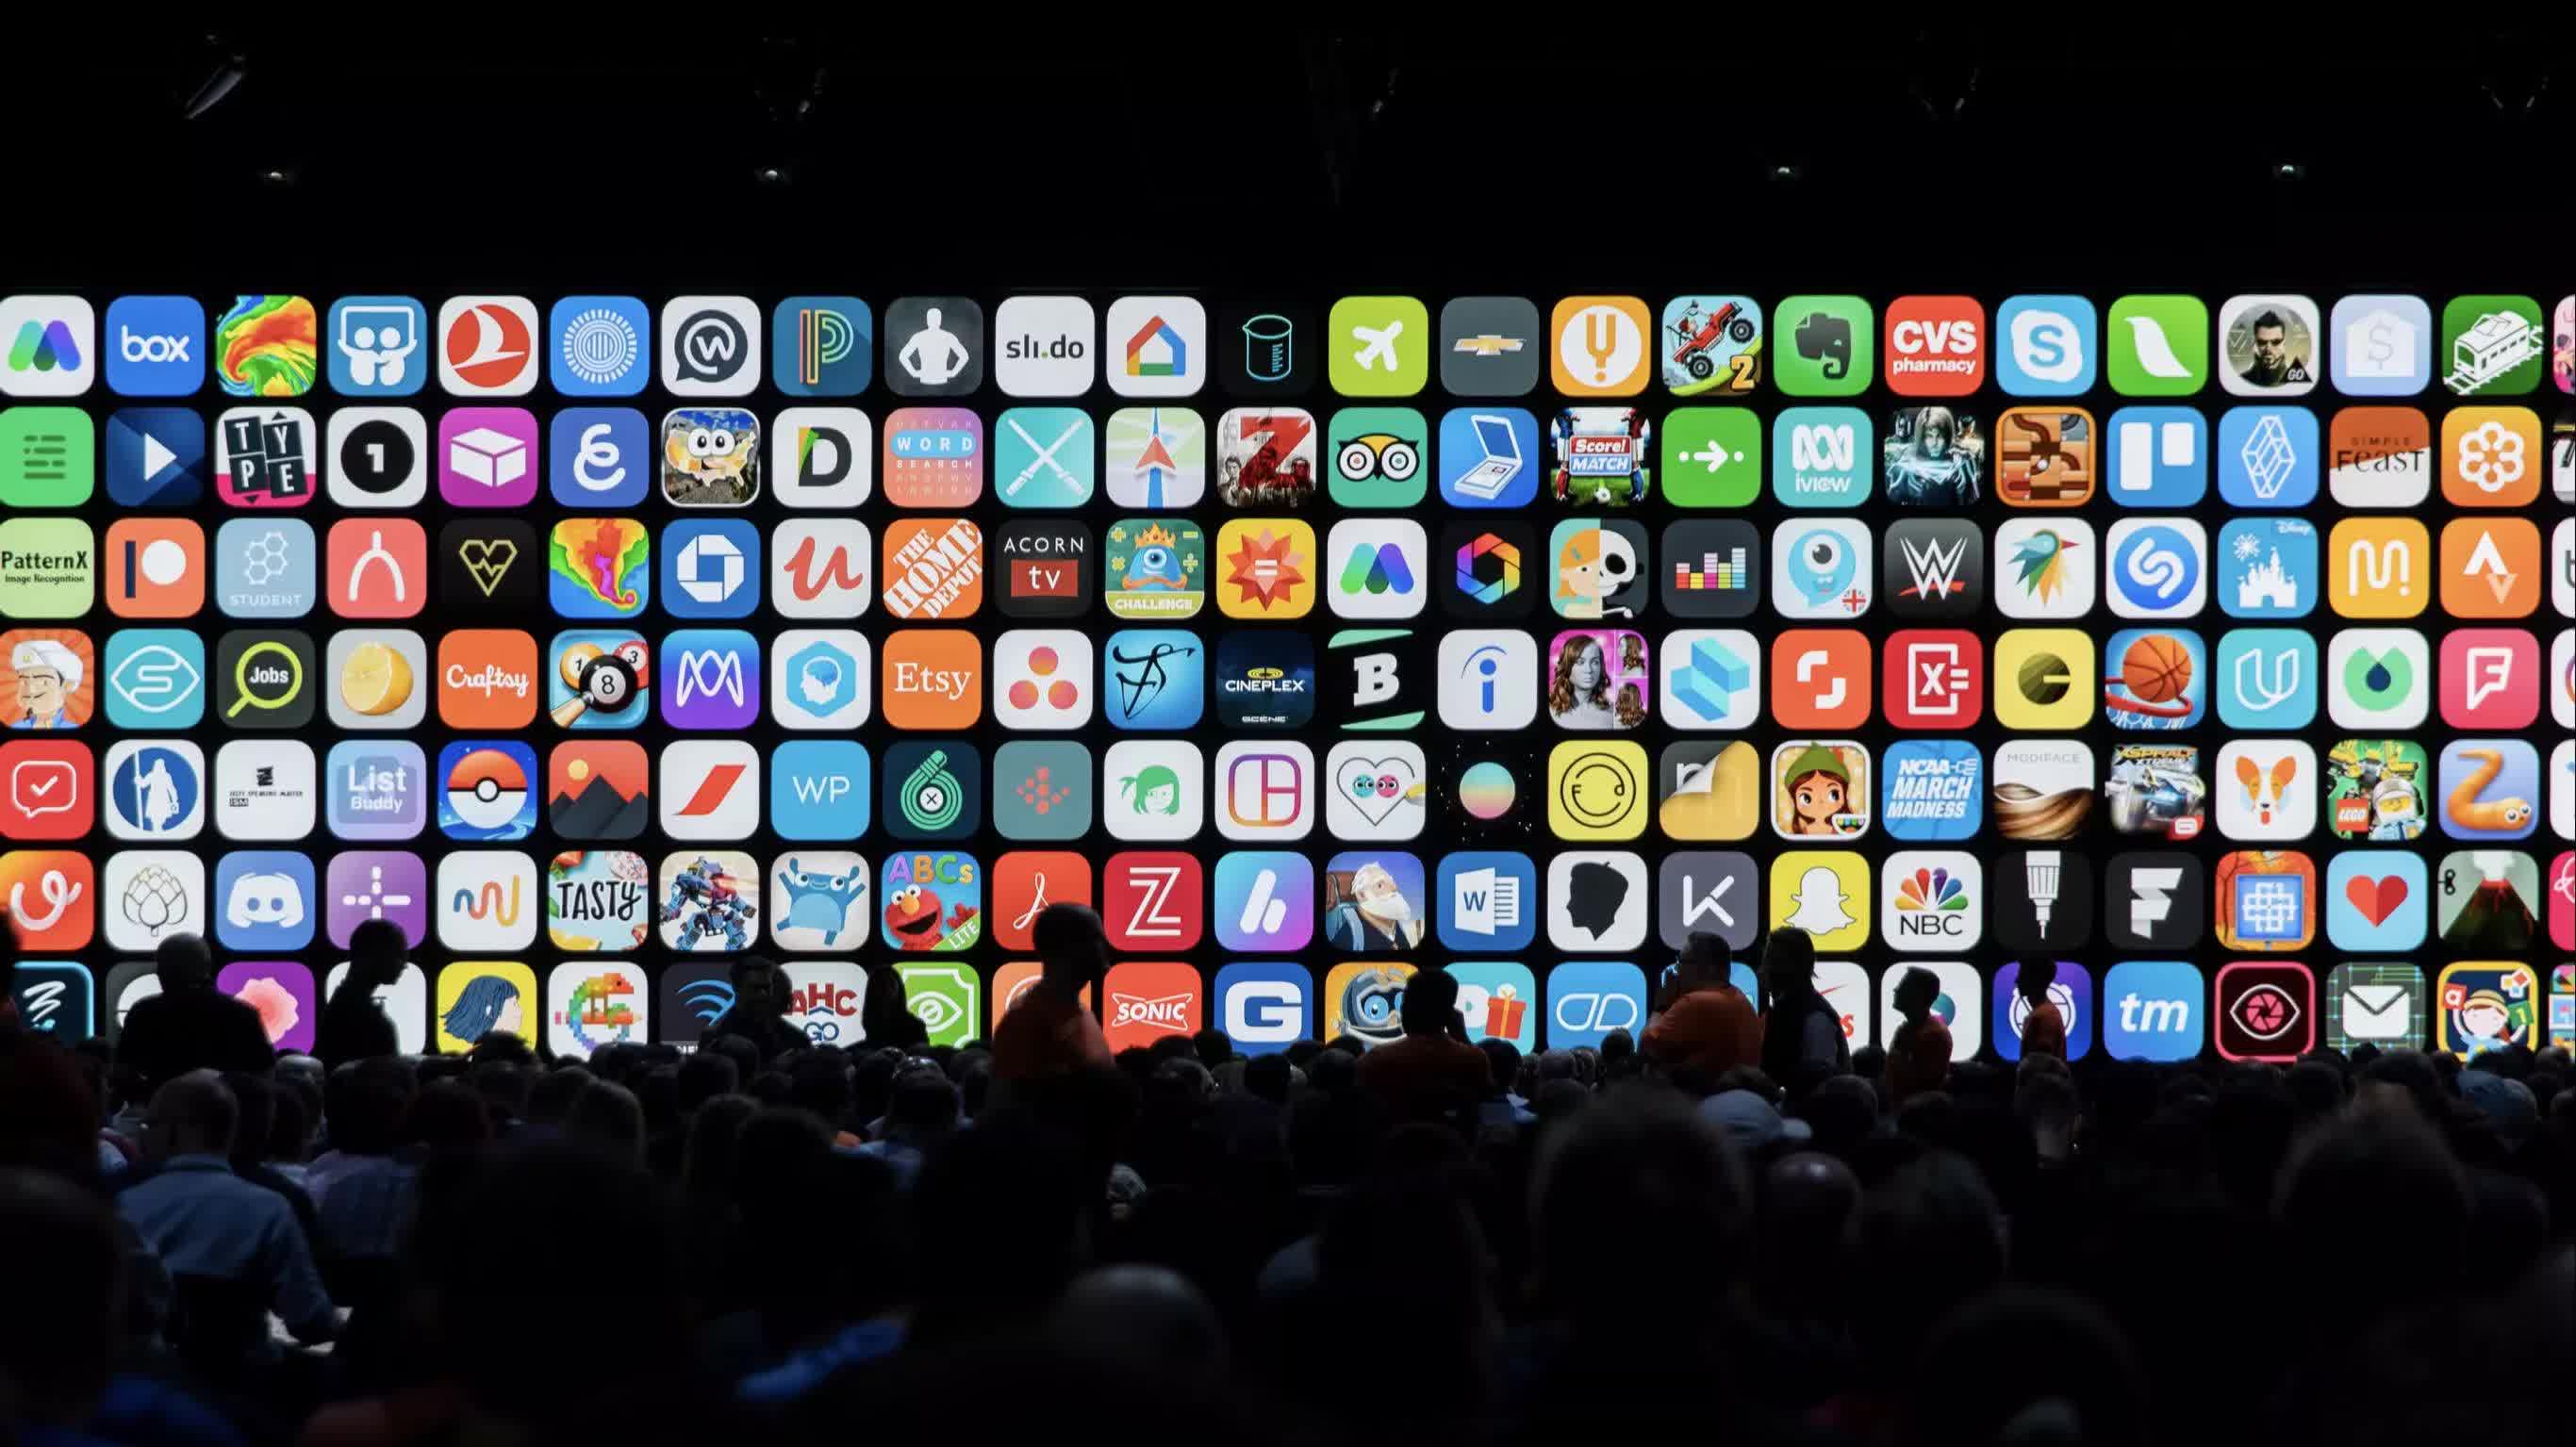 The App Store still has a fleeceware problem that affects millions of iOS users